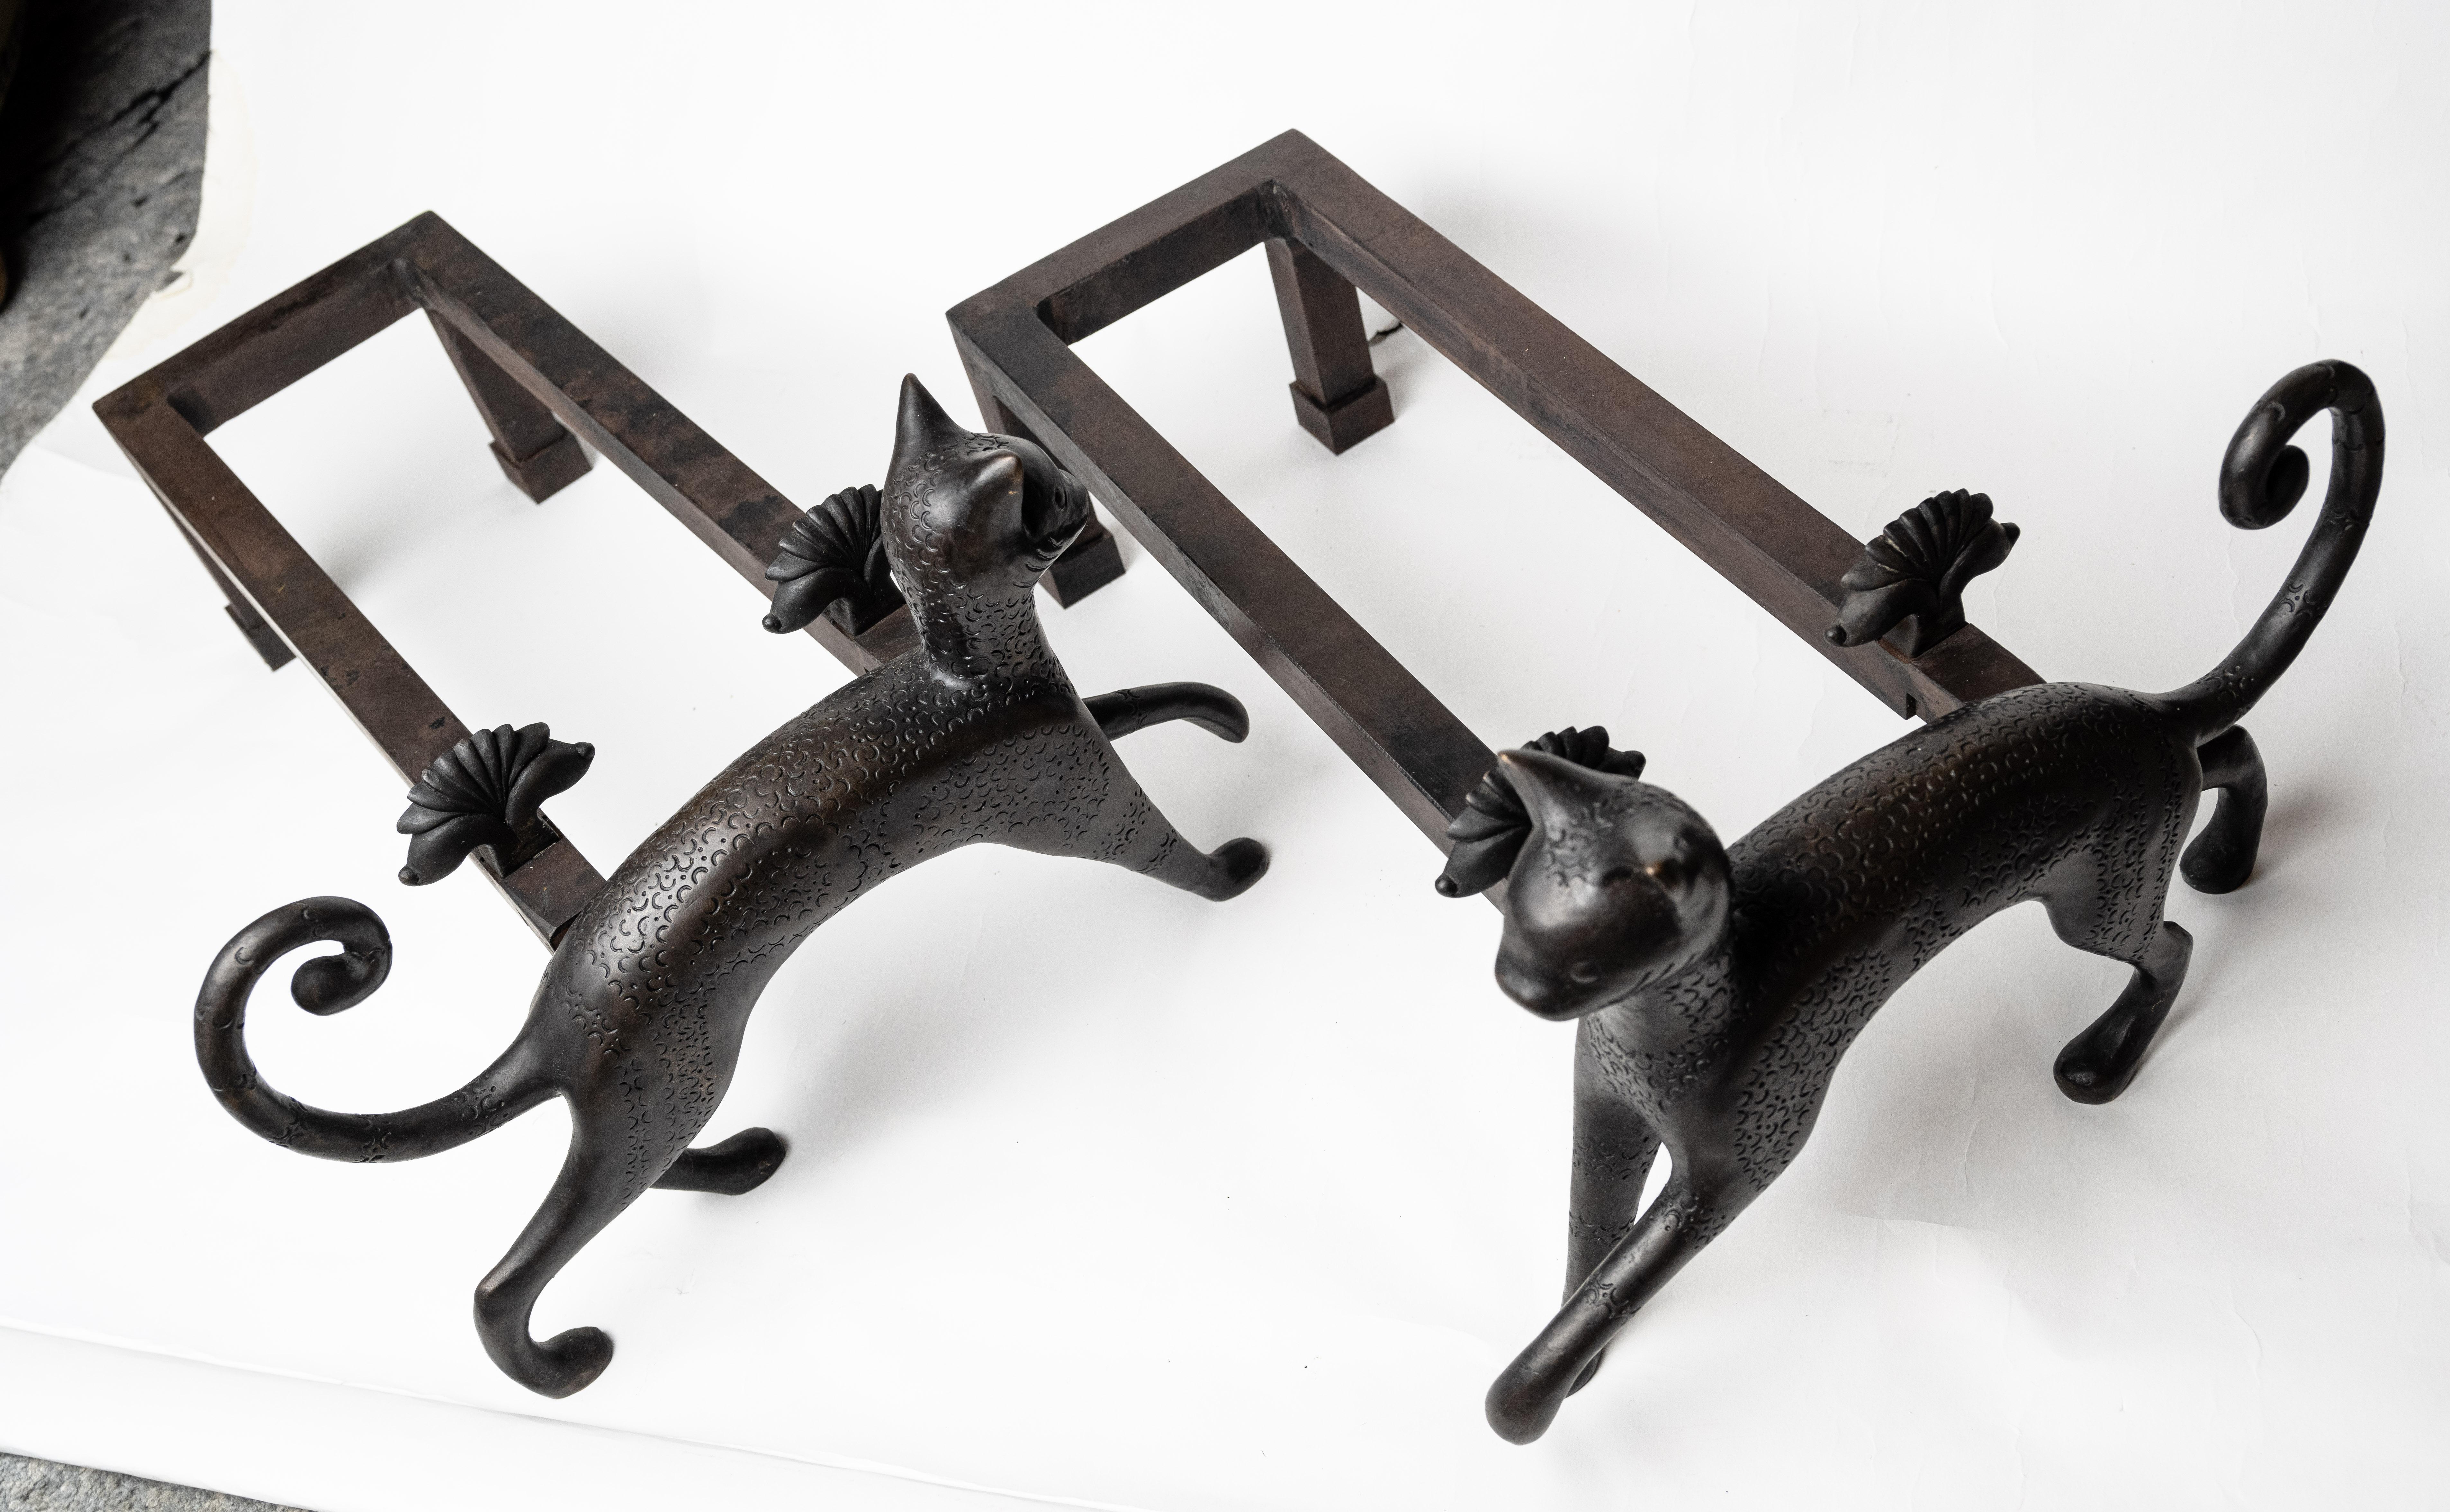 A pair of Armand Rateau (1882-1938) designed andirons with symmetrical stylized felines, having arched tails and stylized heads and bodies. The figures attached to two rectangular fire boxes with decorative neoclassical rosettes. Designed in 1925.